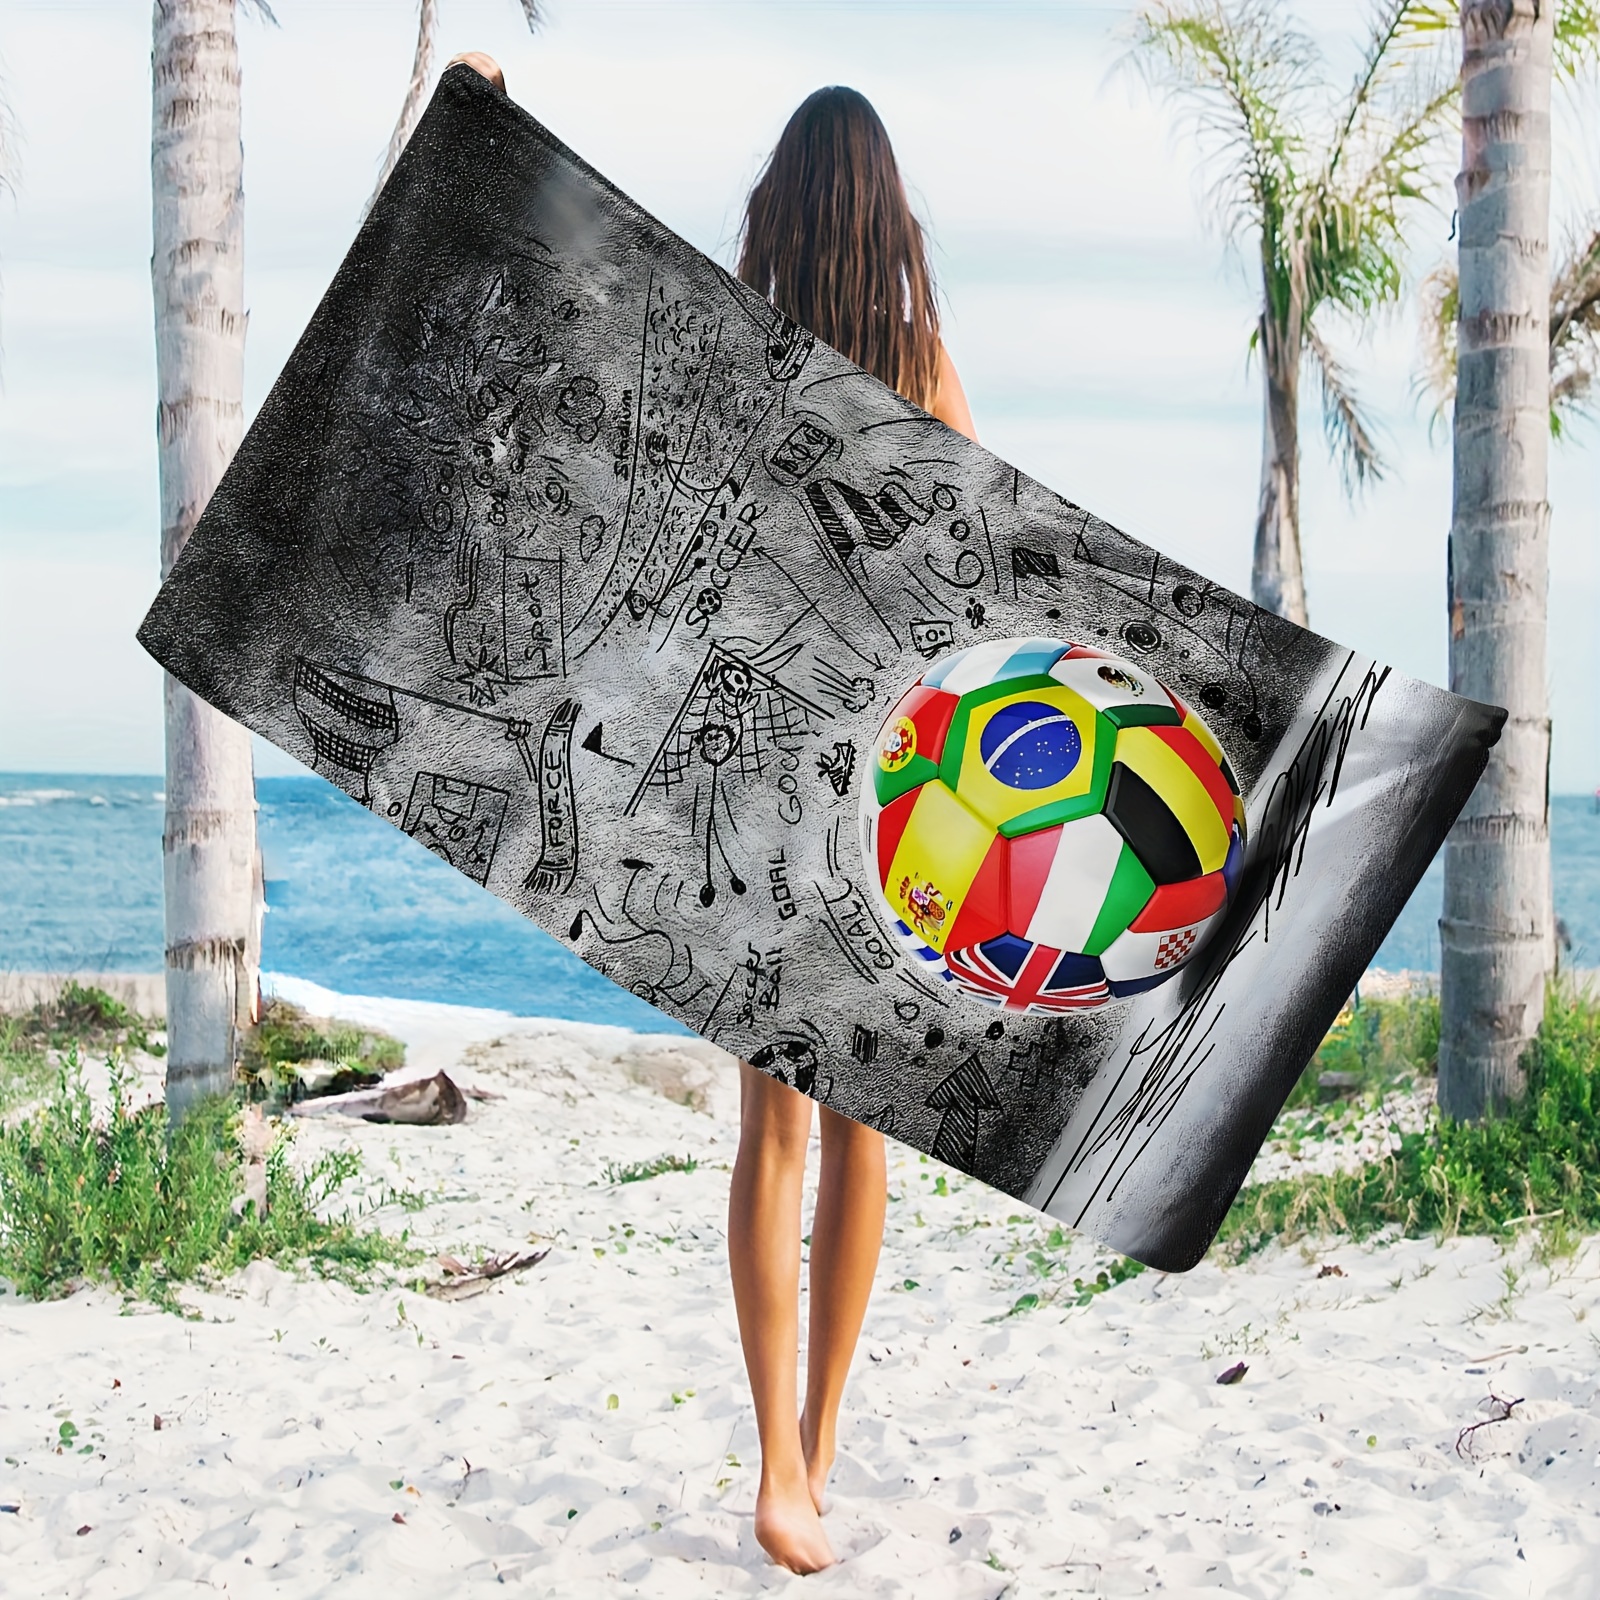 

1pc Football Pattern Printed Beach Towel, High Quality Large Bath Towel Thickened Microfiber Towel, Summer Beach Towel, Grass Pad, Yoga Pad, Suitable For Swimming Pool, Camping, Travel